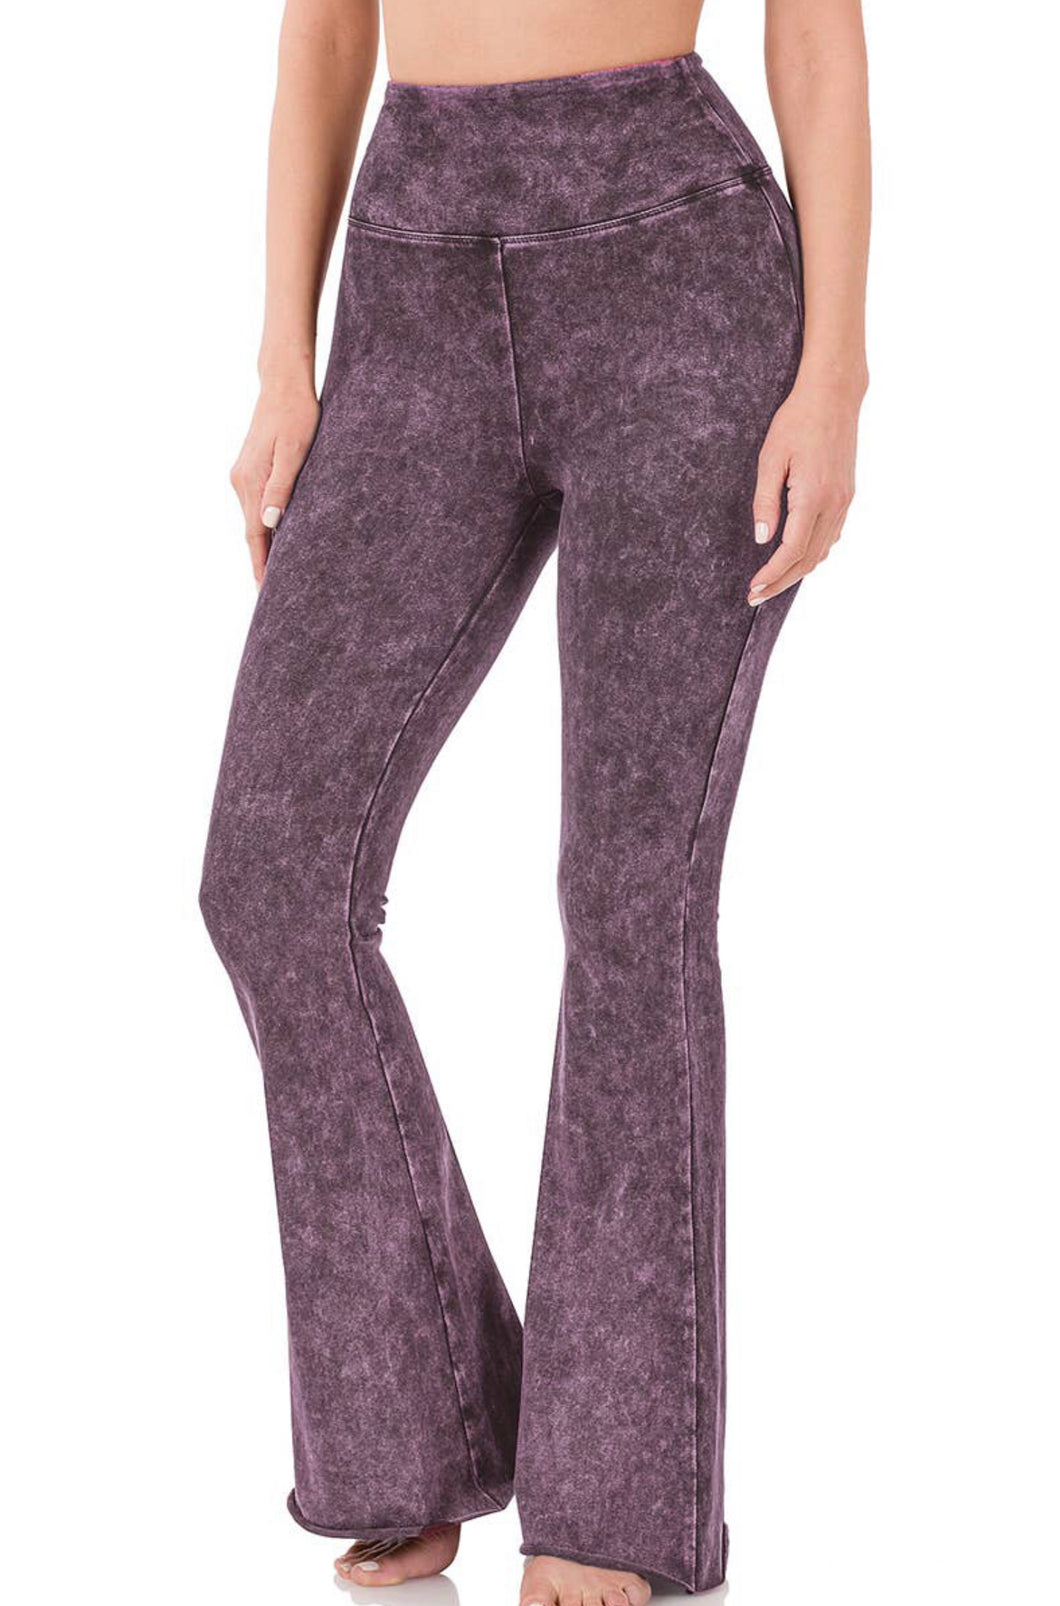 Blackberry High Waisted Mineral Wash Pants